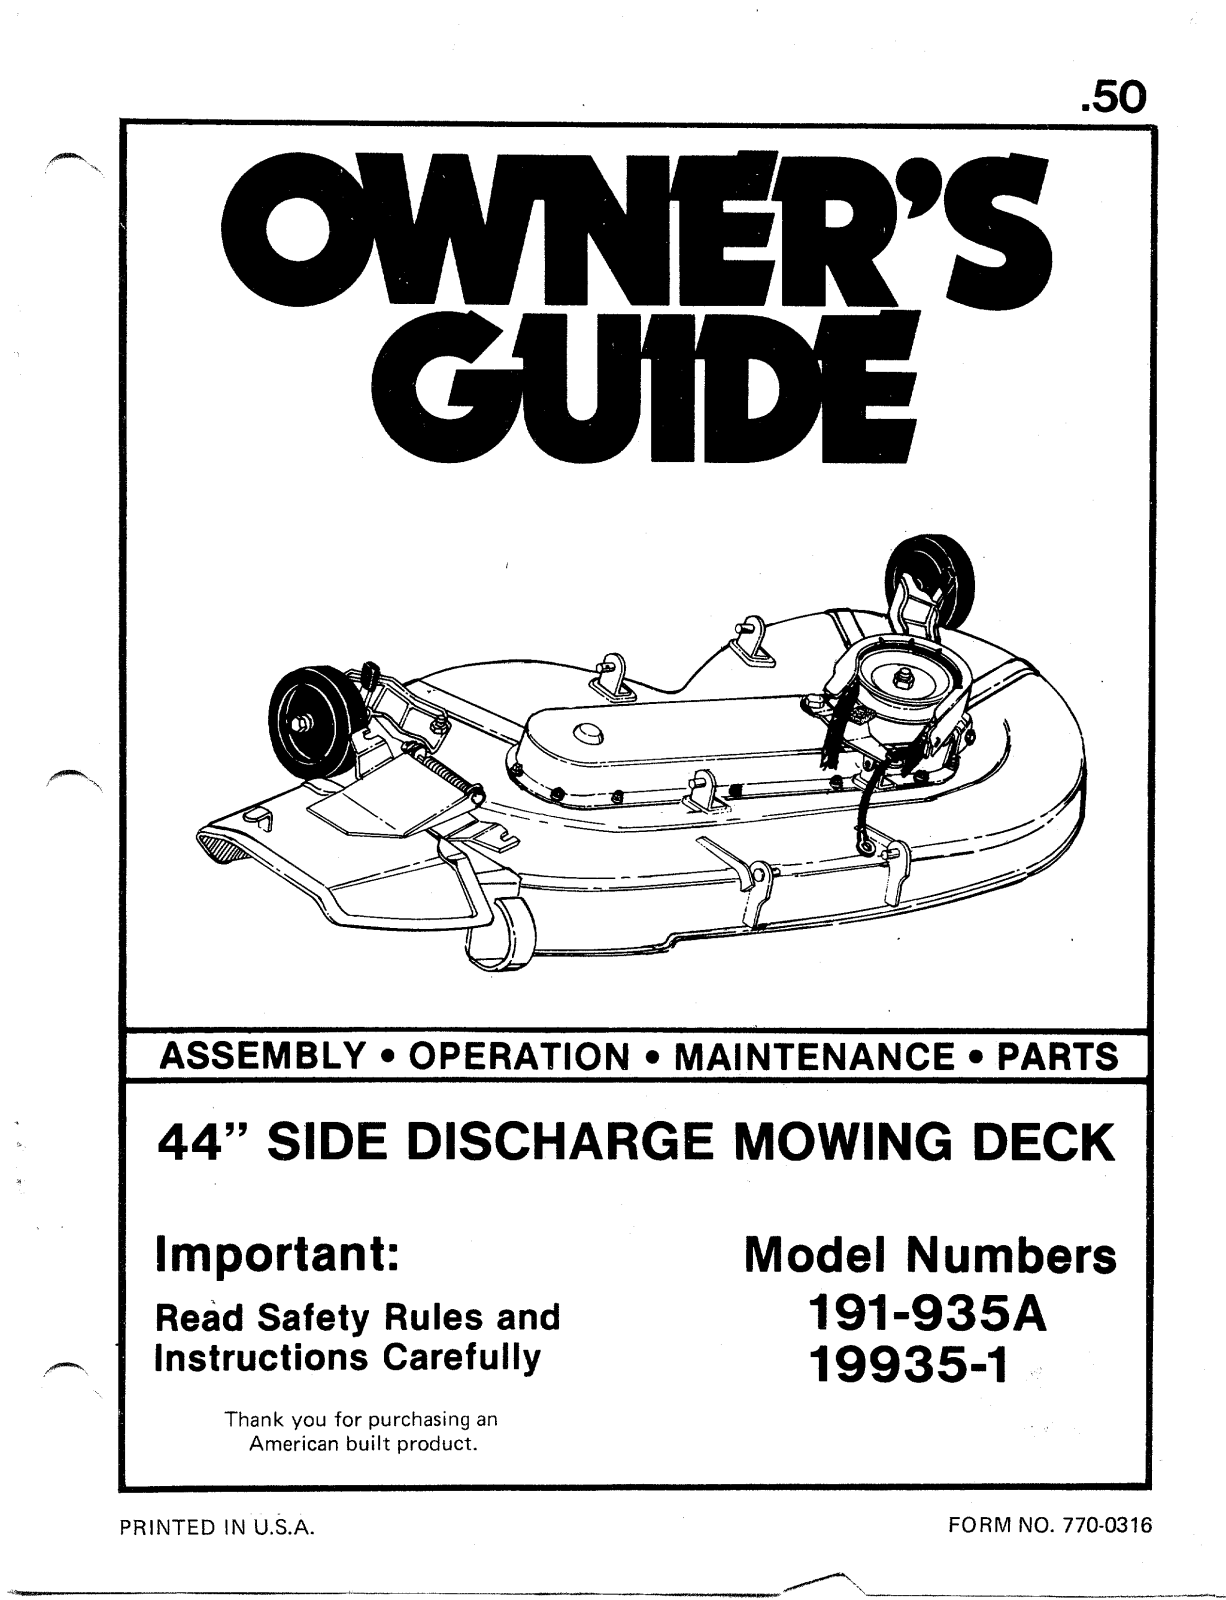 Mtd 191-935a, 19935-1 owners Manual